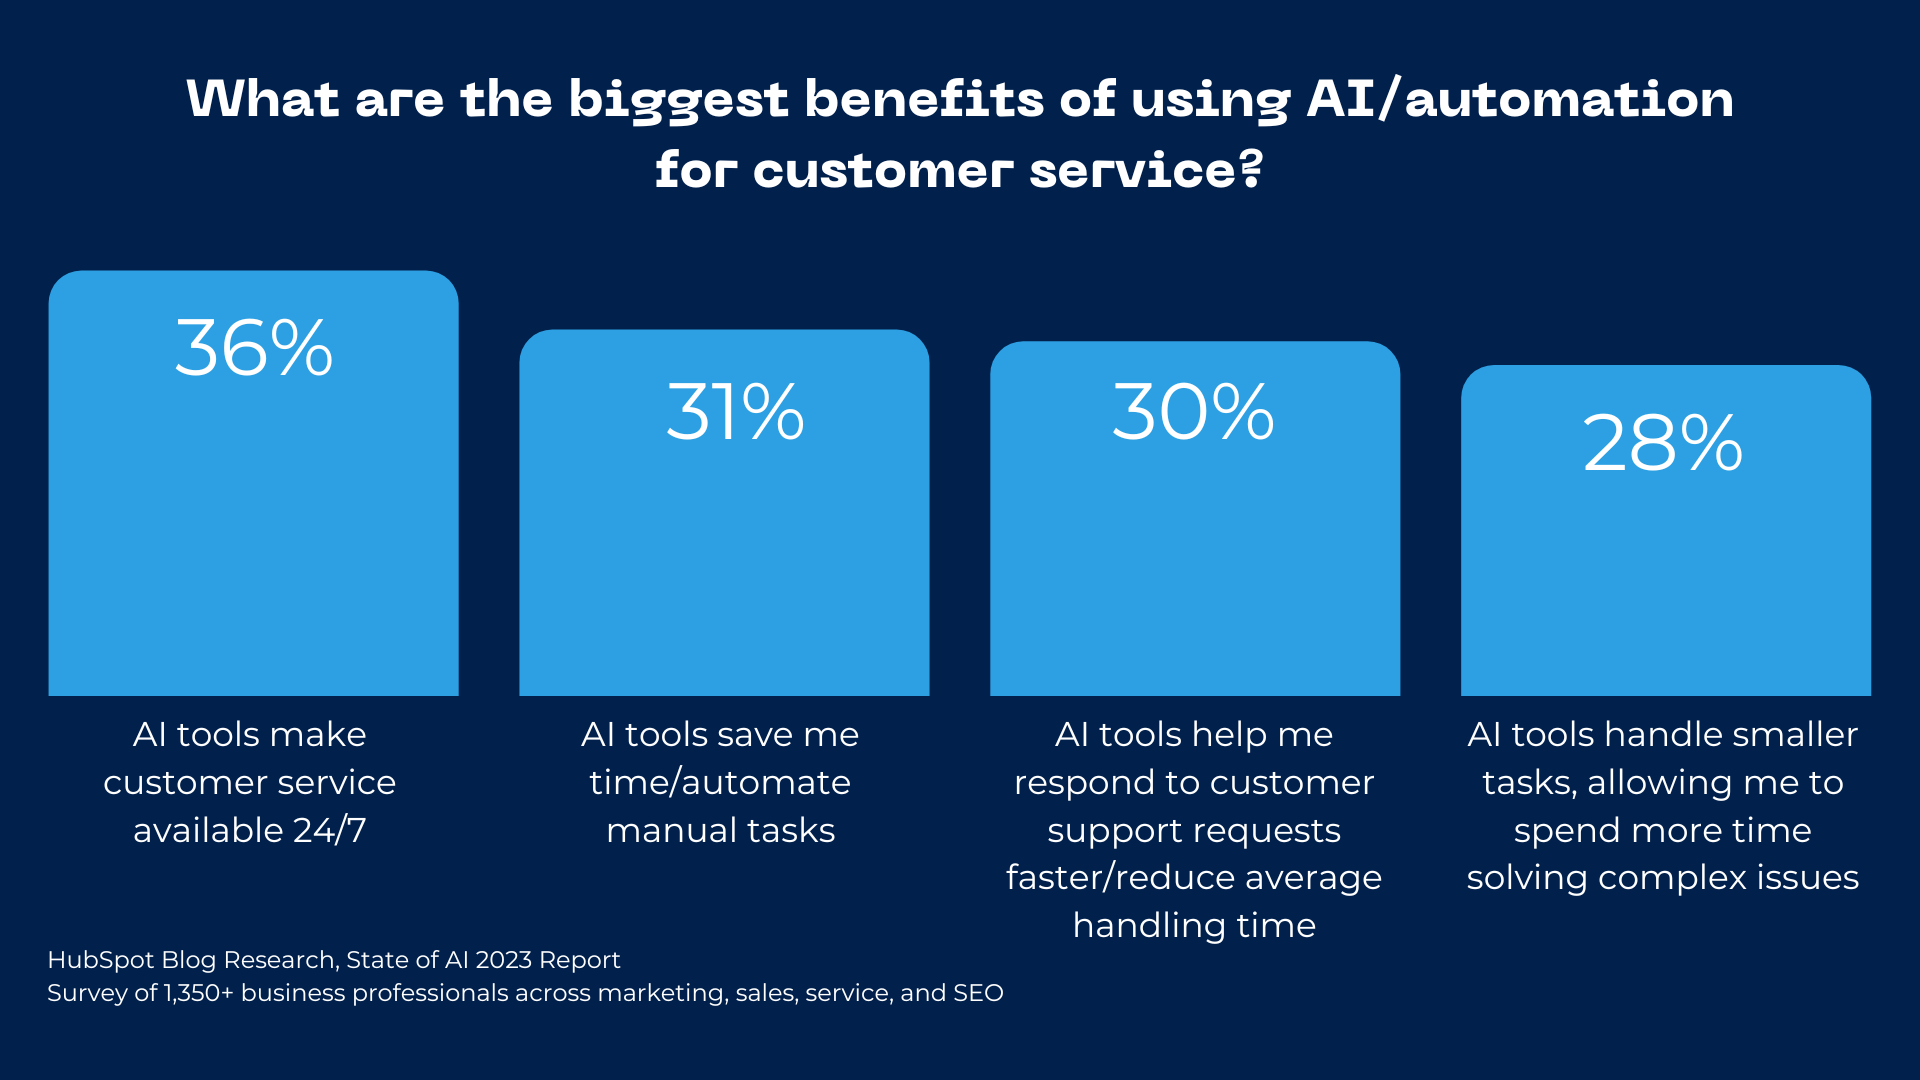 benefits%20to%20using%20AI%20for%20customer%20service.png?width=1920&height=1080&name=benefits%20to%20using%20AI%20for%20customer%20service - The HubSpot Blog’s State of AI Report [Key Findings from 1300+ Business Professionals]